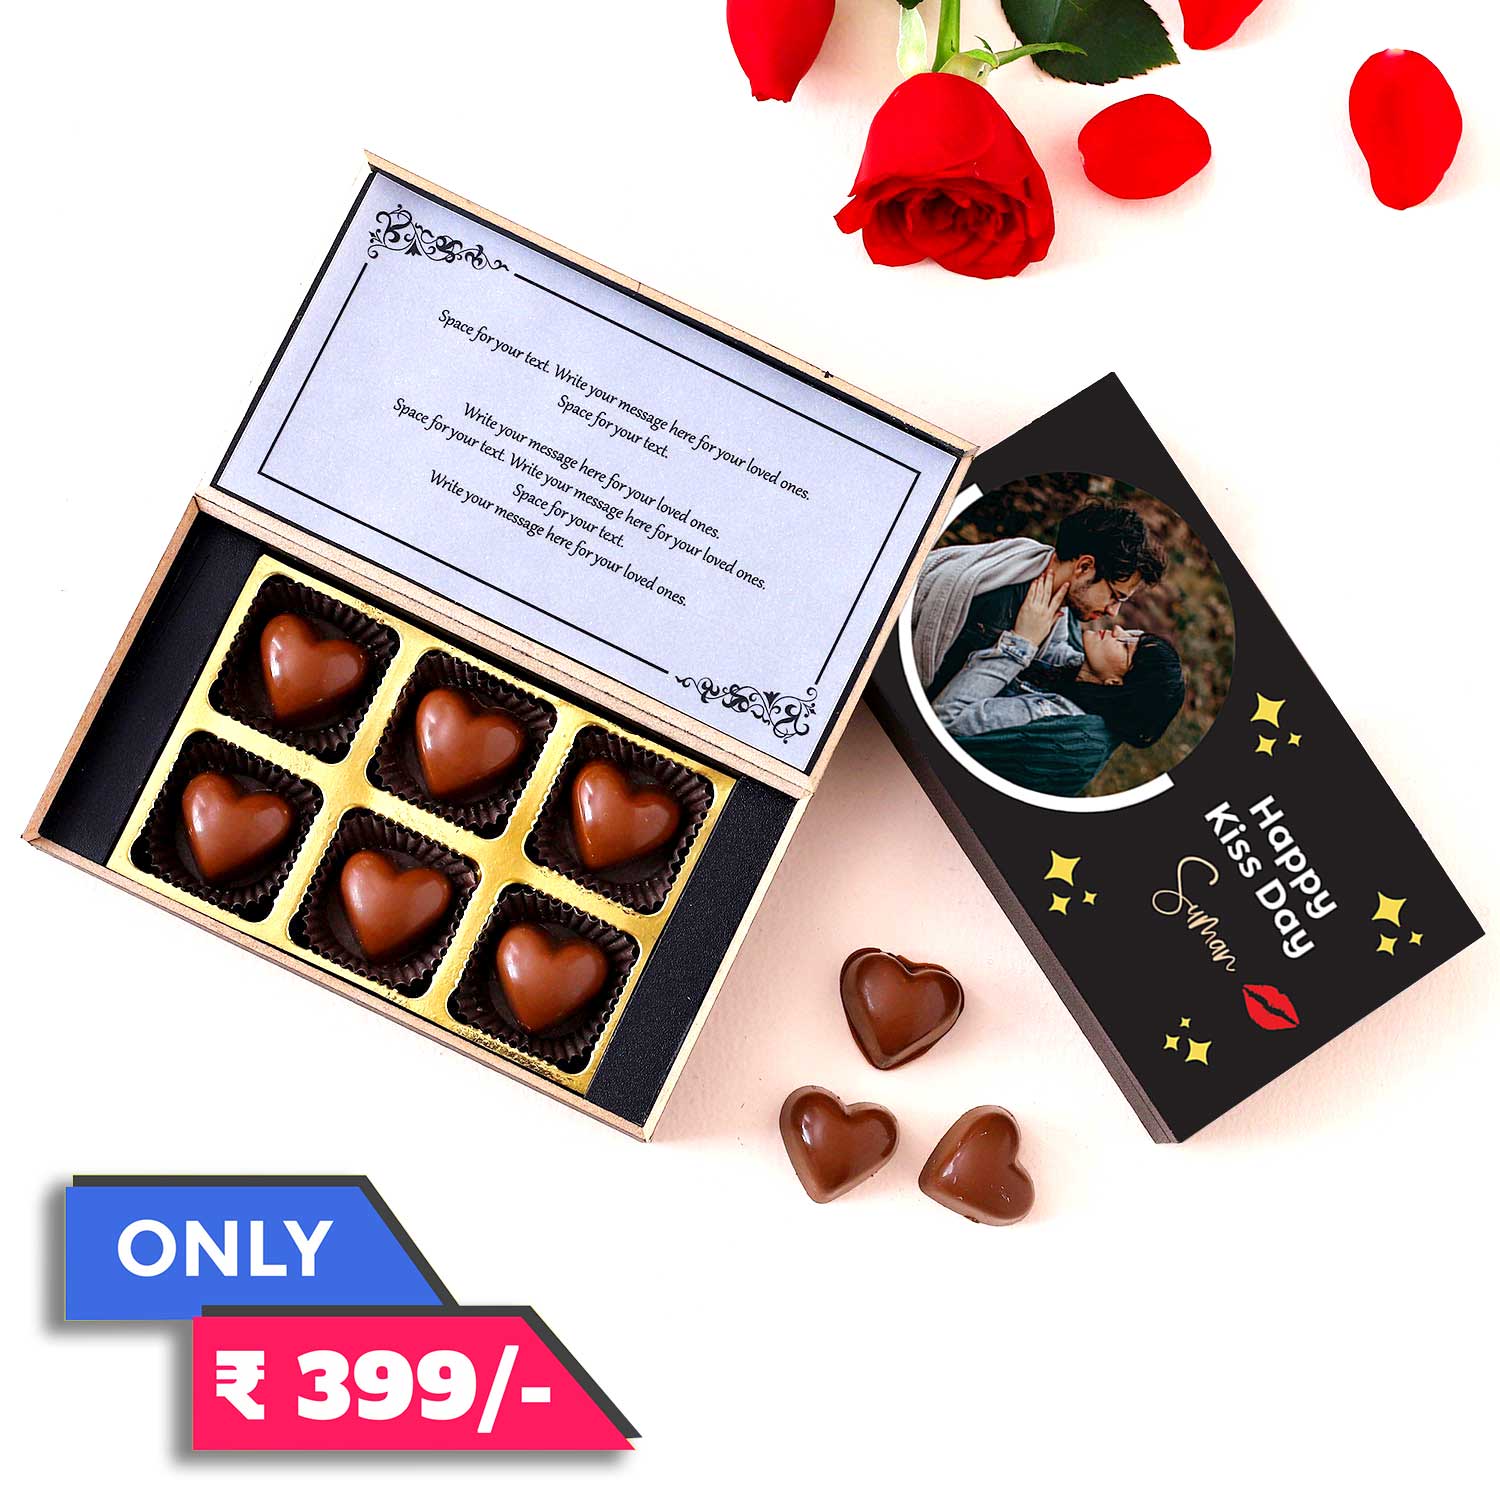 Unique Kiss Day Customised Chocolate gift